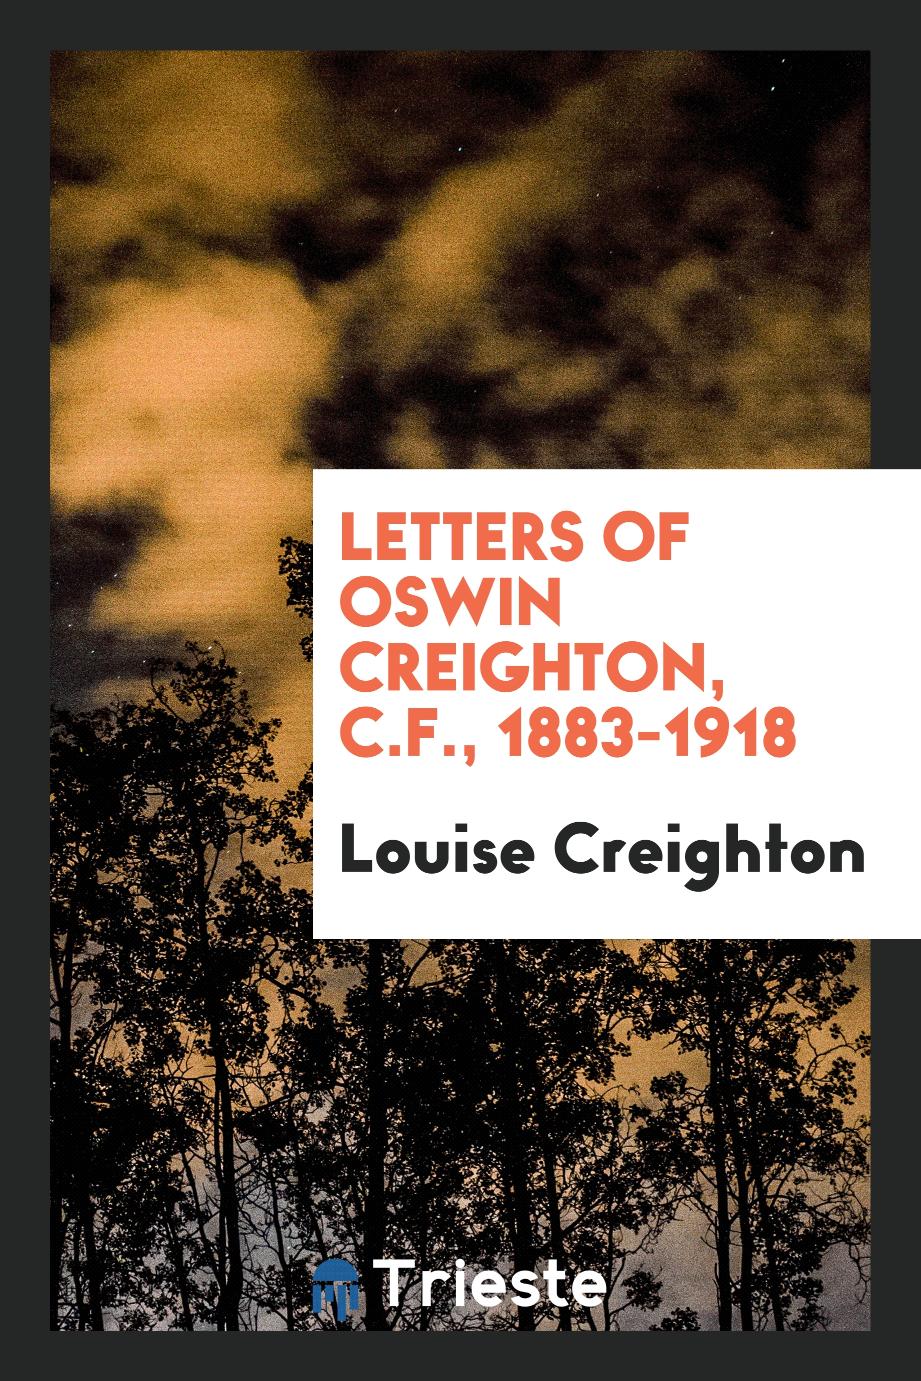 Letters of Oswin Creighton, C.F., 1883-1918